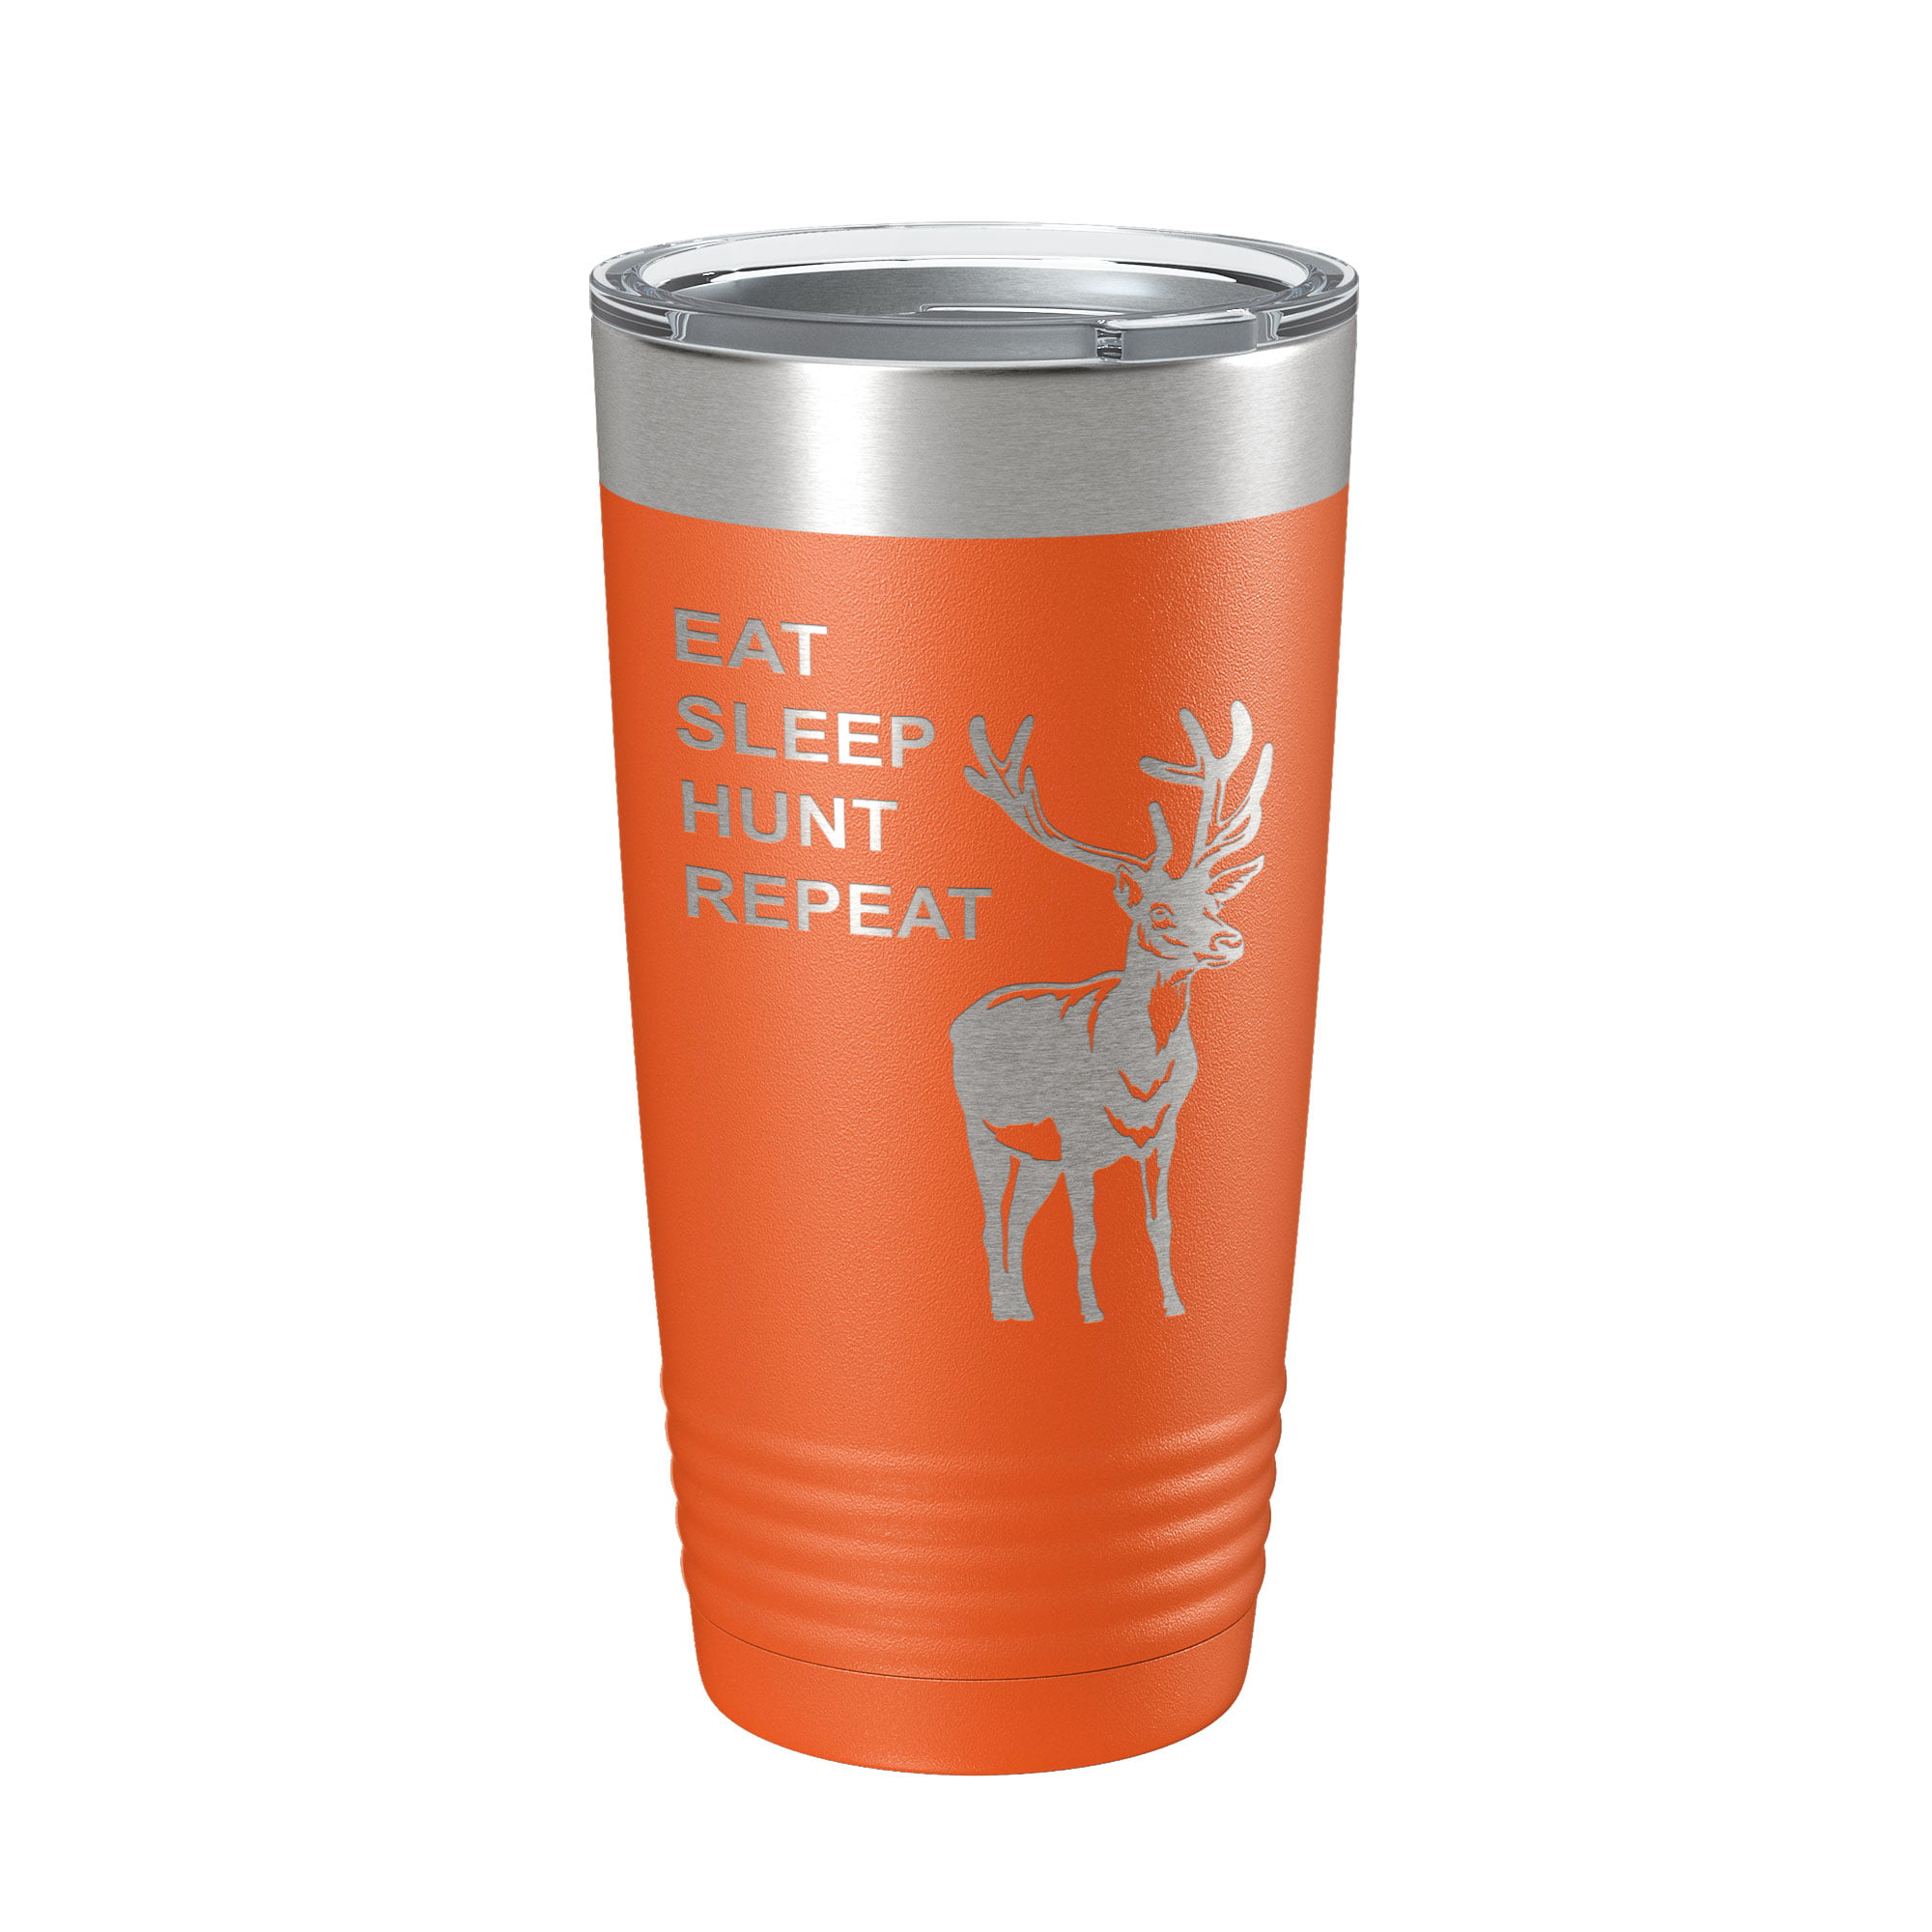 DEER CAMP® Tumbler Water Bottle Thermos Black With Etched Logo 16 oz. –  DEER CAMP® COFFEE